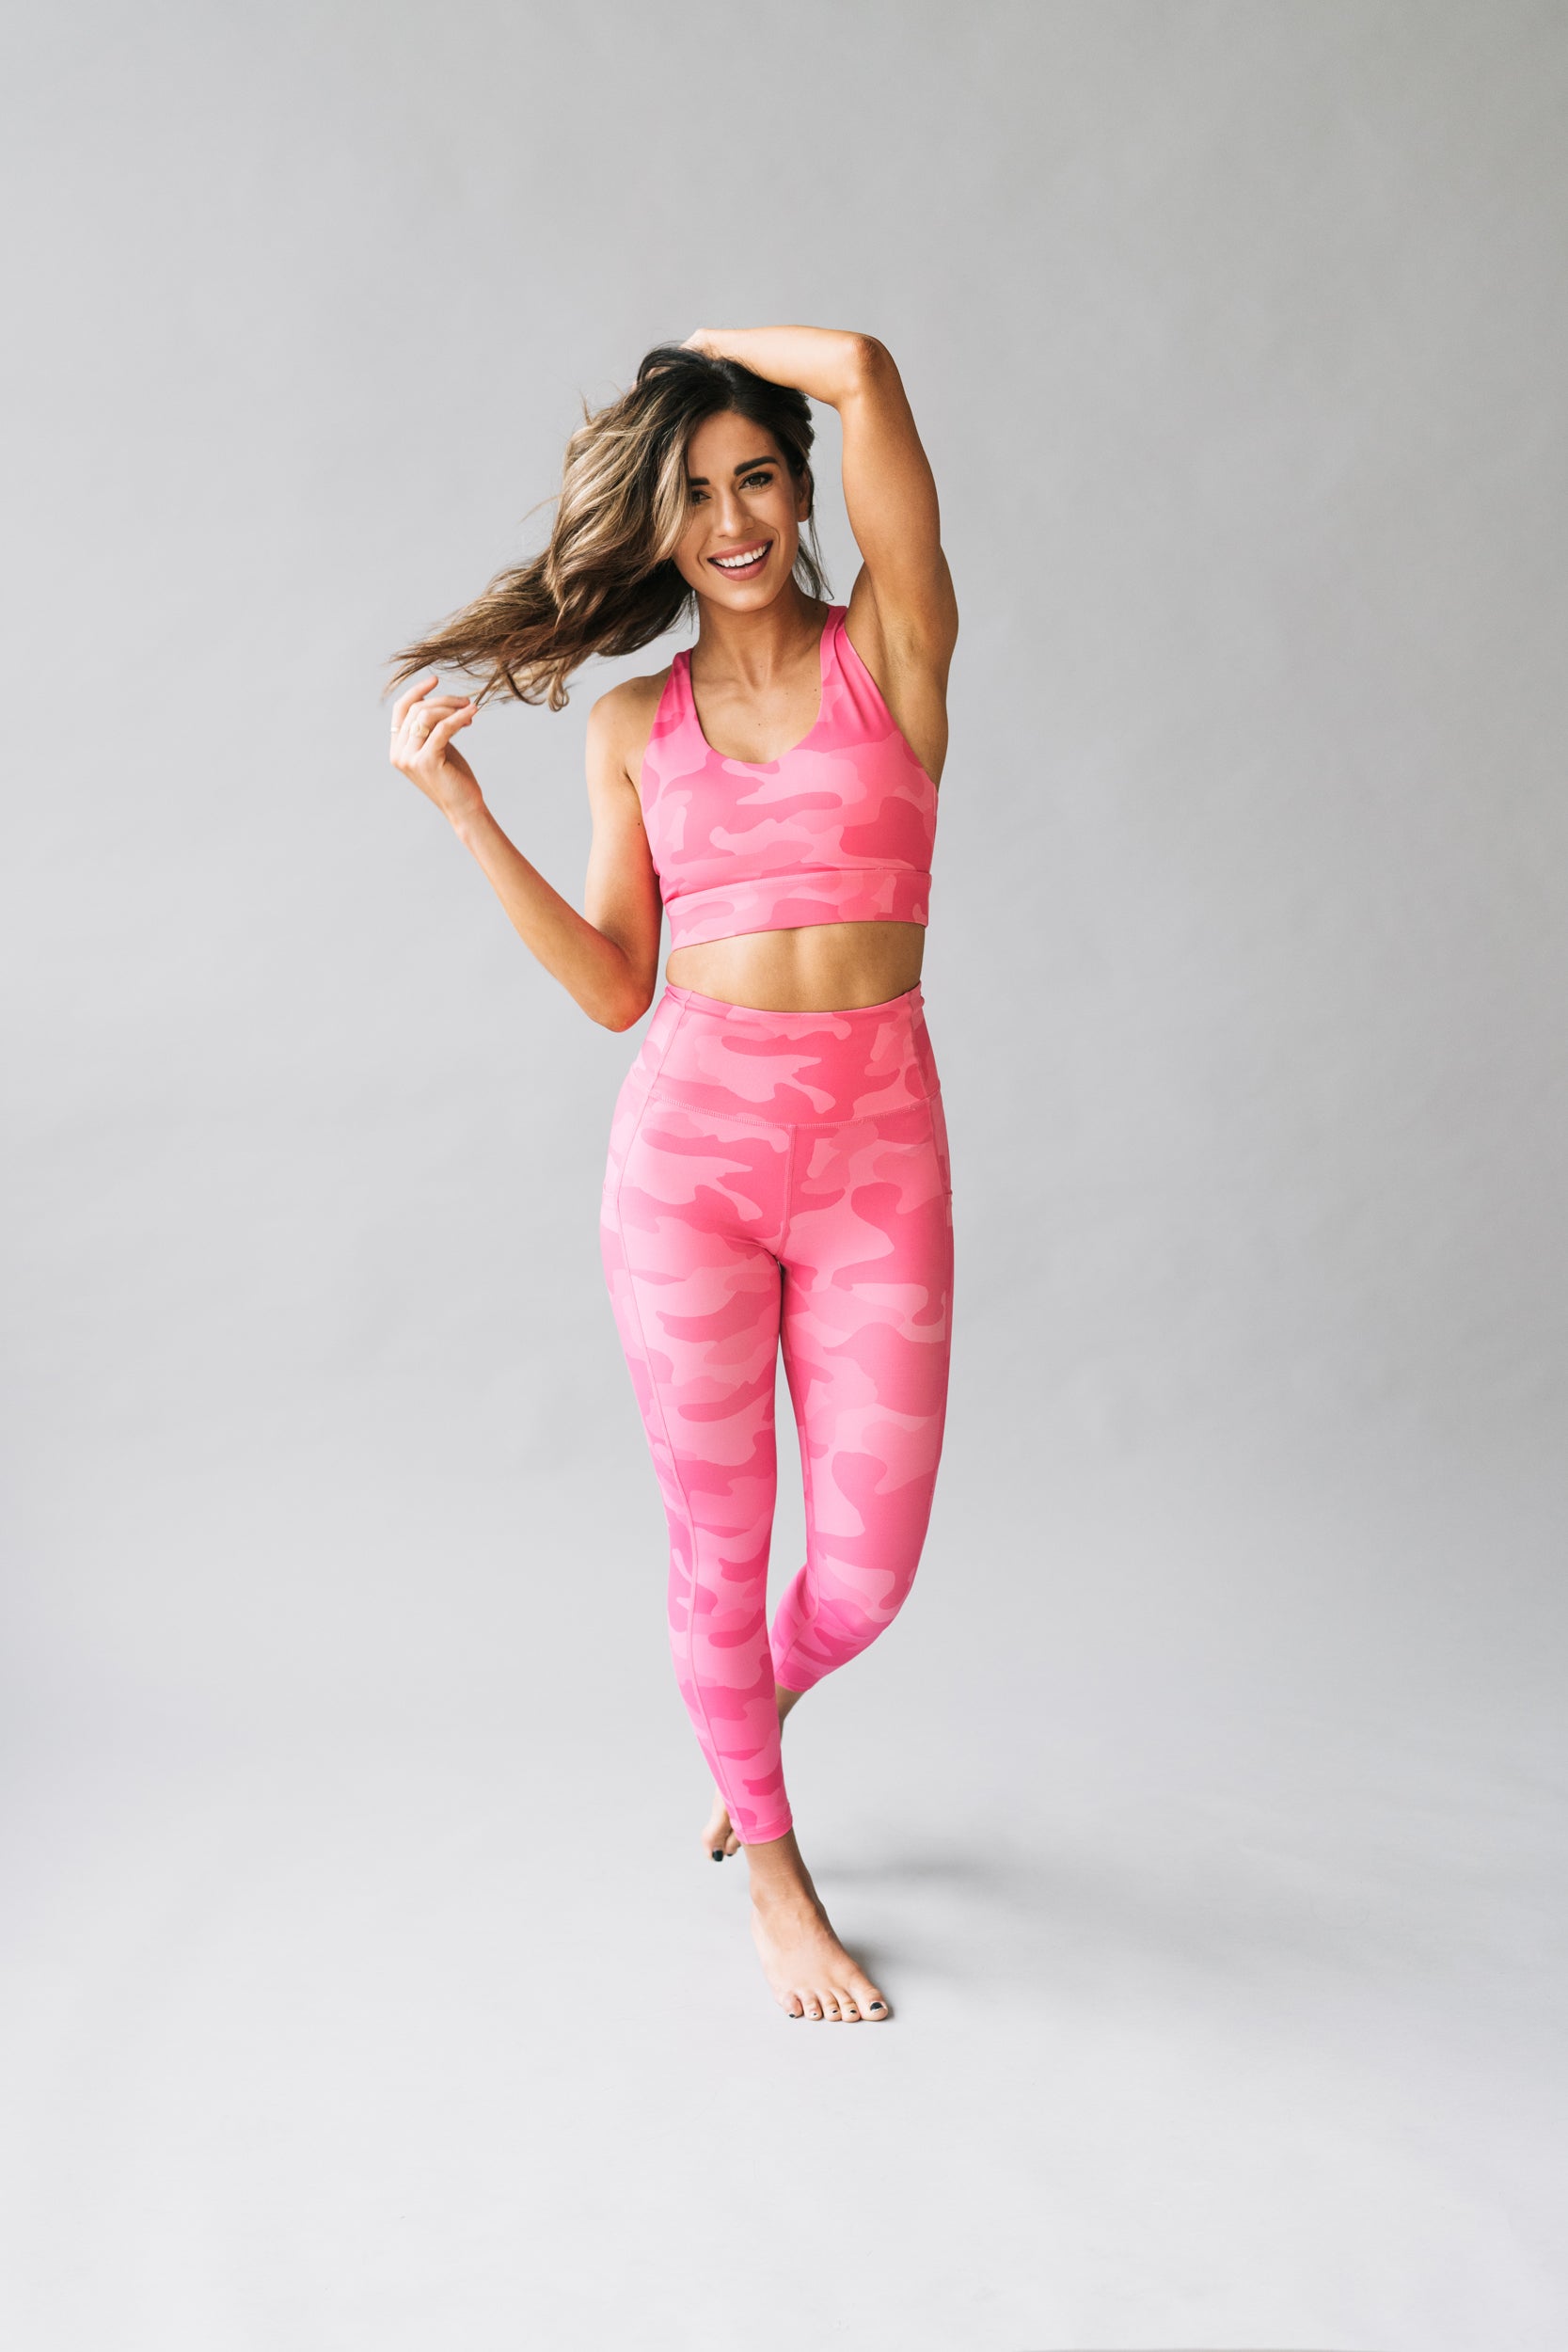 Dark Pink Camou Leggings, Gym, Fitness & Sports Clothing